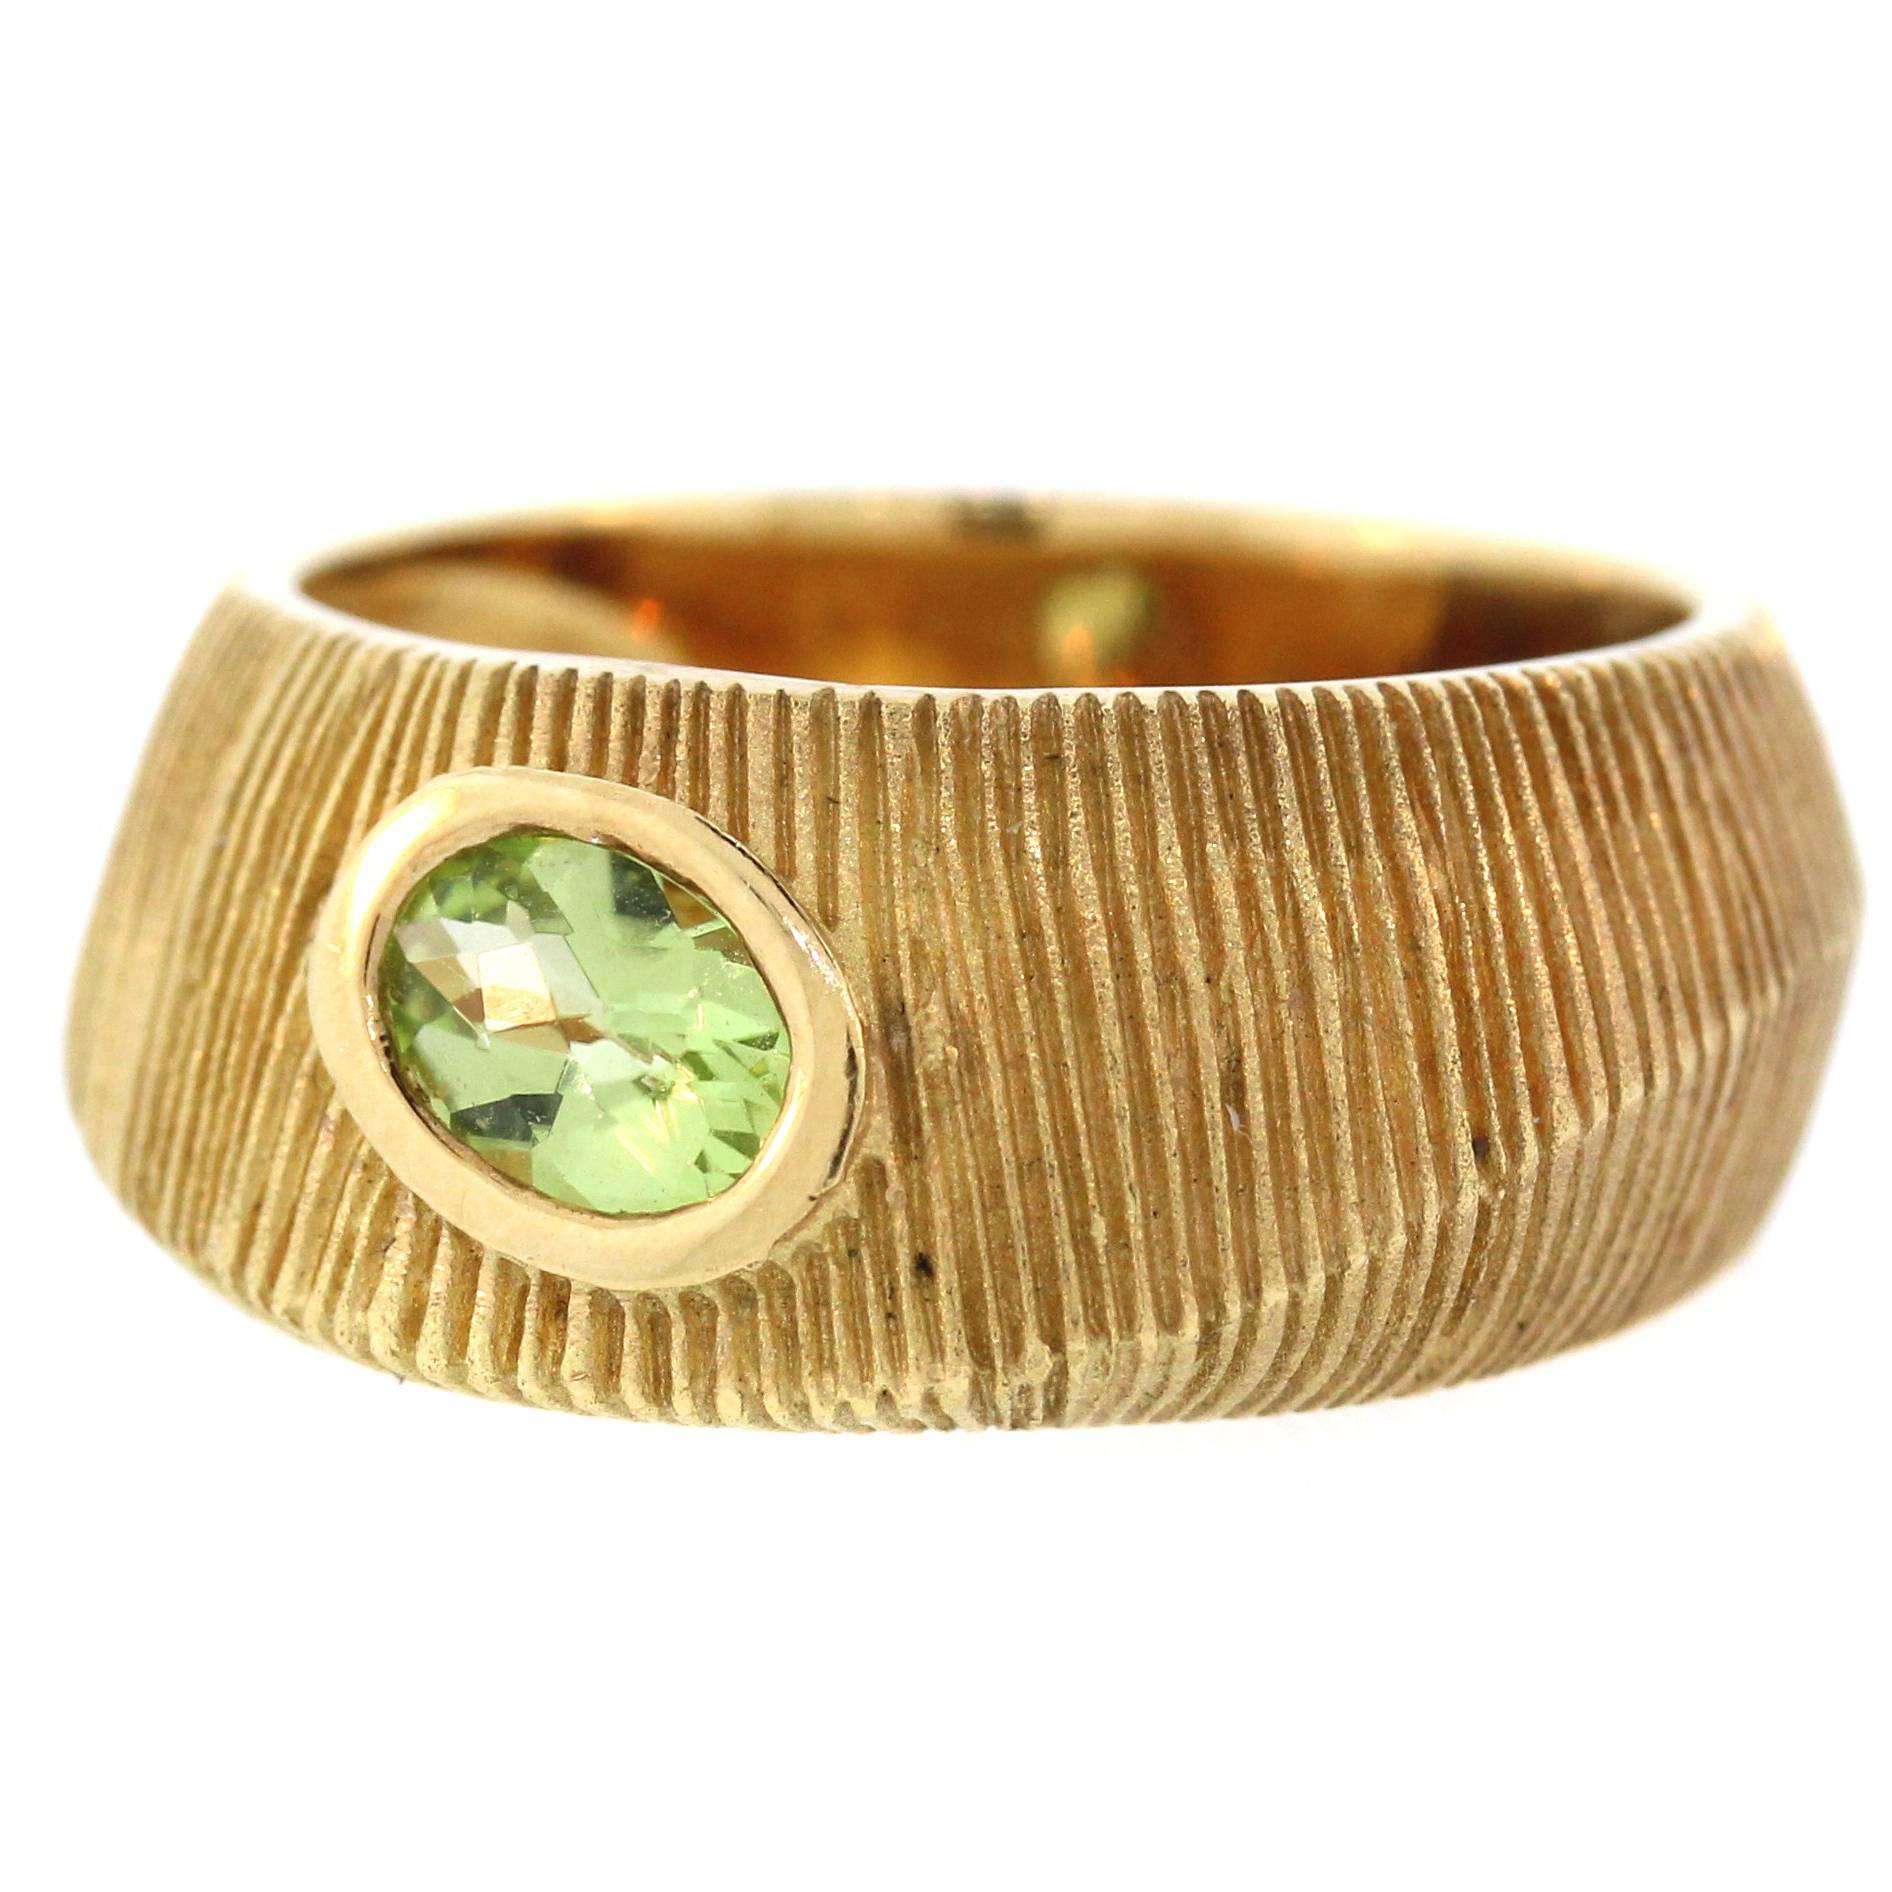 Brushed Gold Ring with Peridot